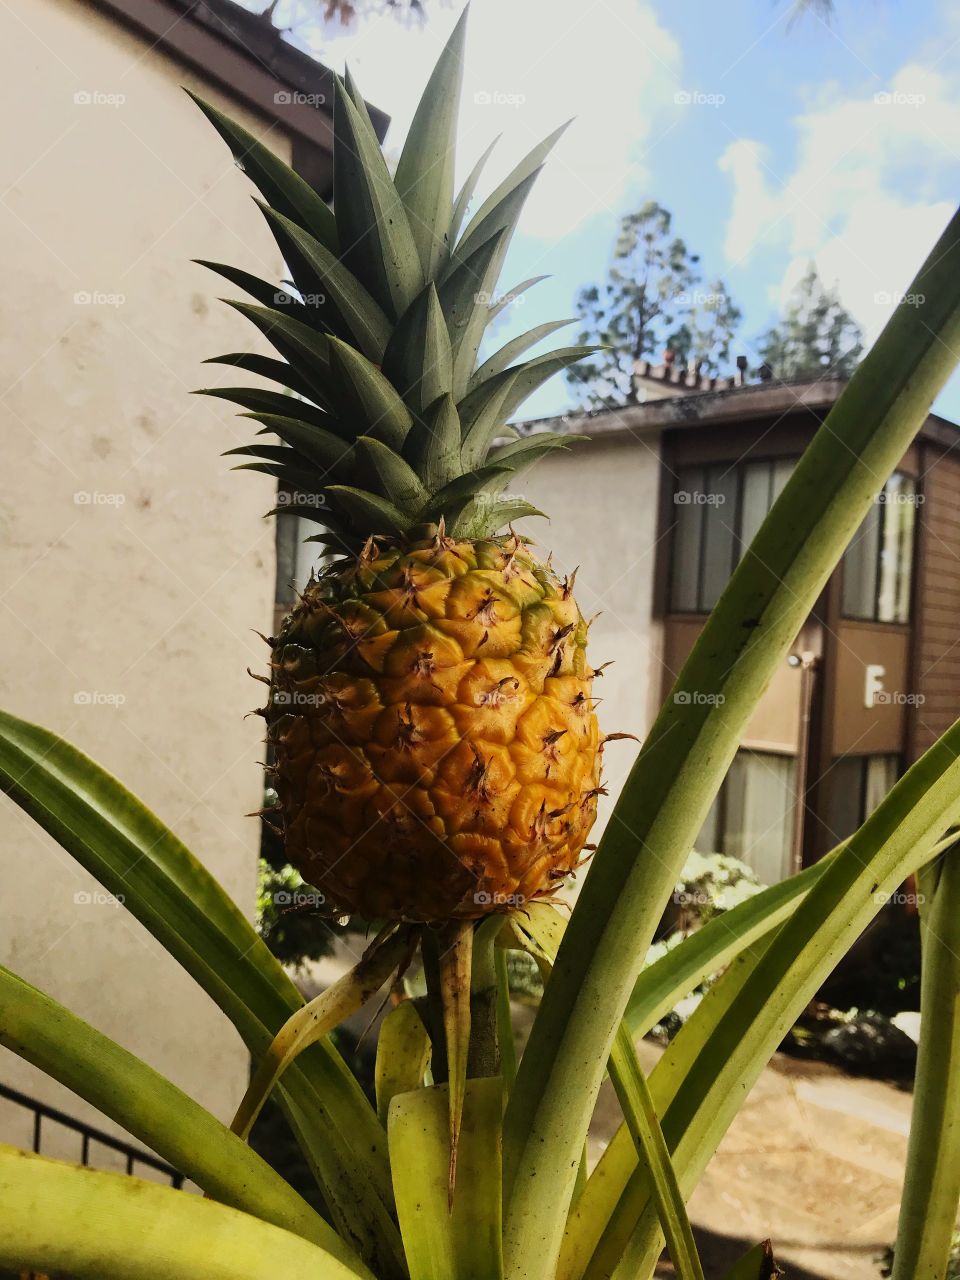 Pineapple plant grown at home